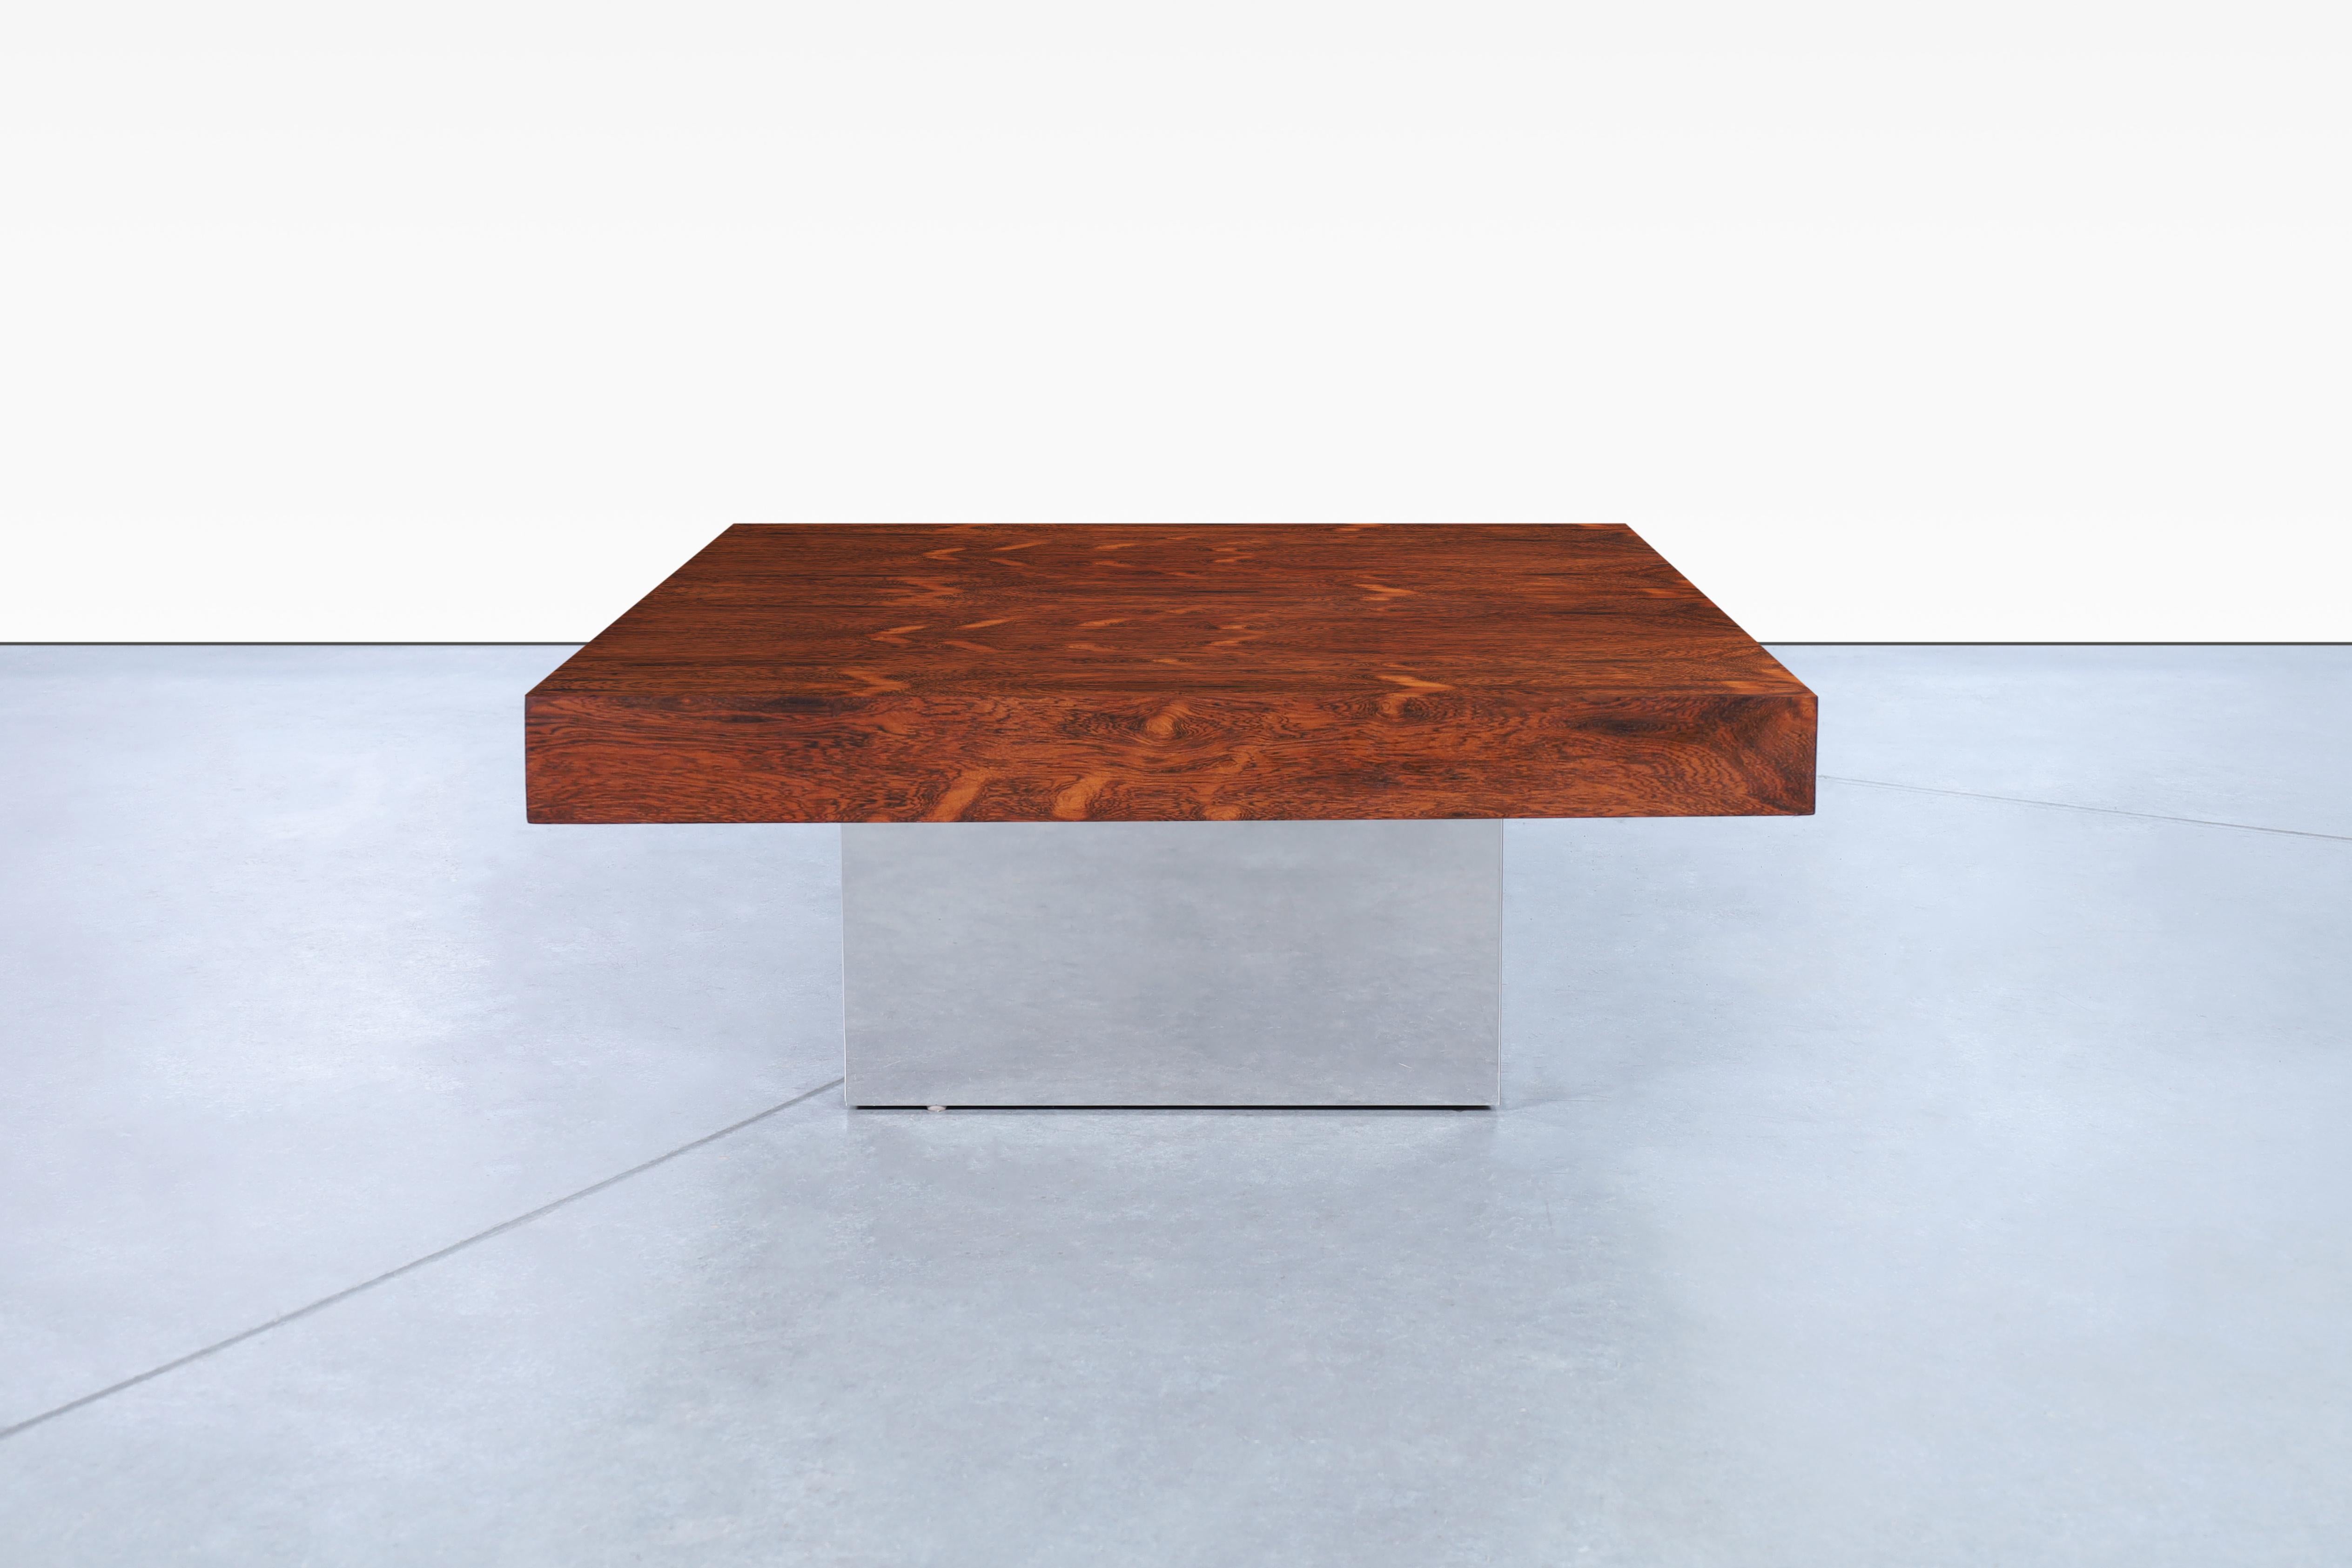 Stunning vintage rosewood and chrome coffee table designed by Milo Baughman for Thayer Coggin, in the United States circa 1970s. This table has a modern design that highlights the exceptional quality of the Brazilian rosewood used in its